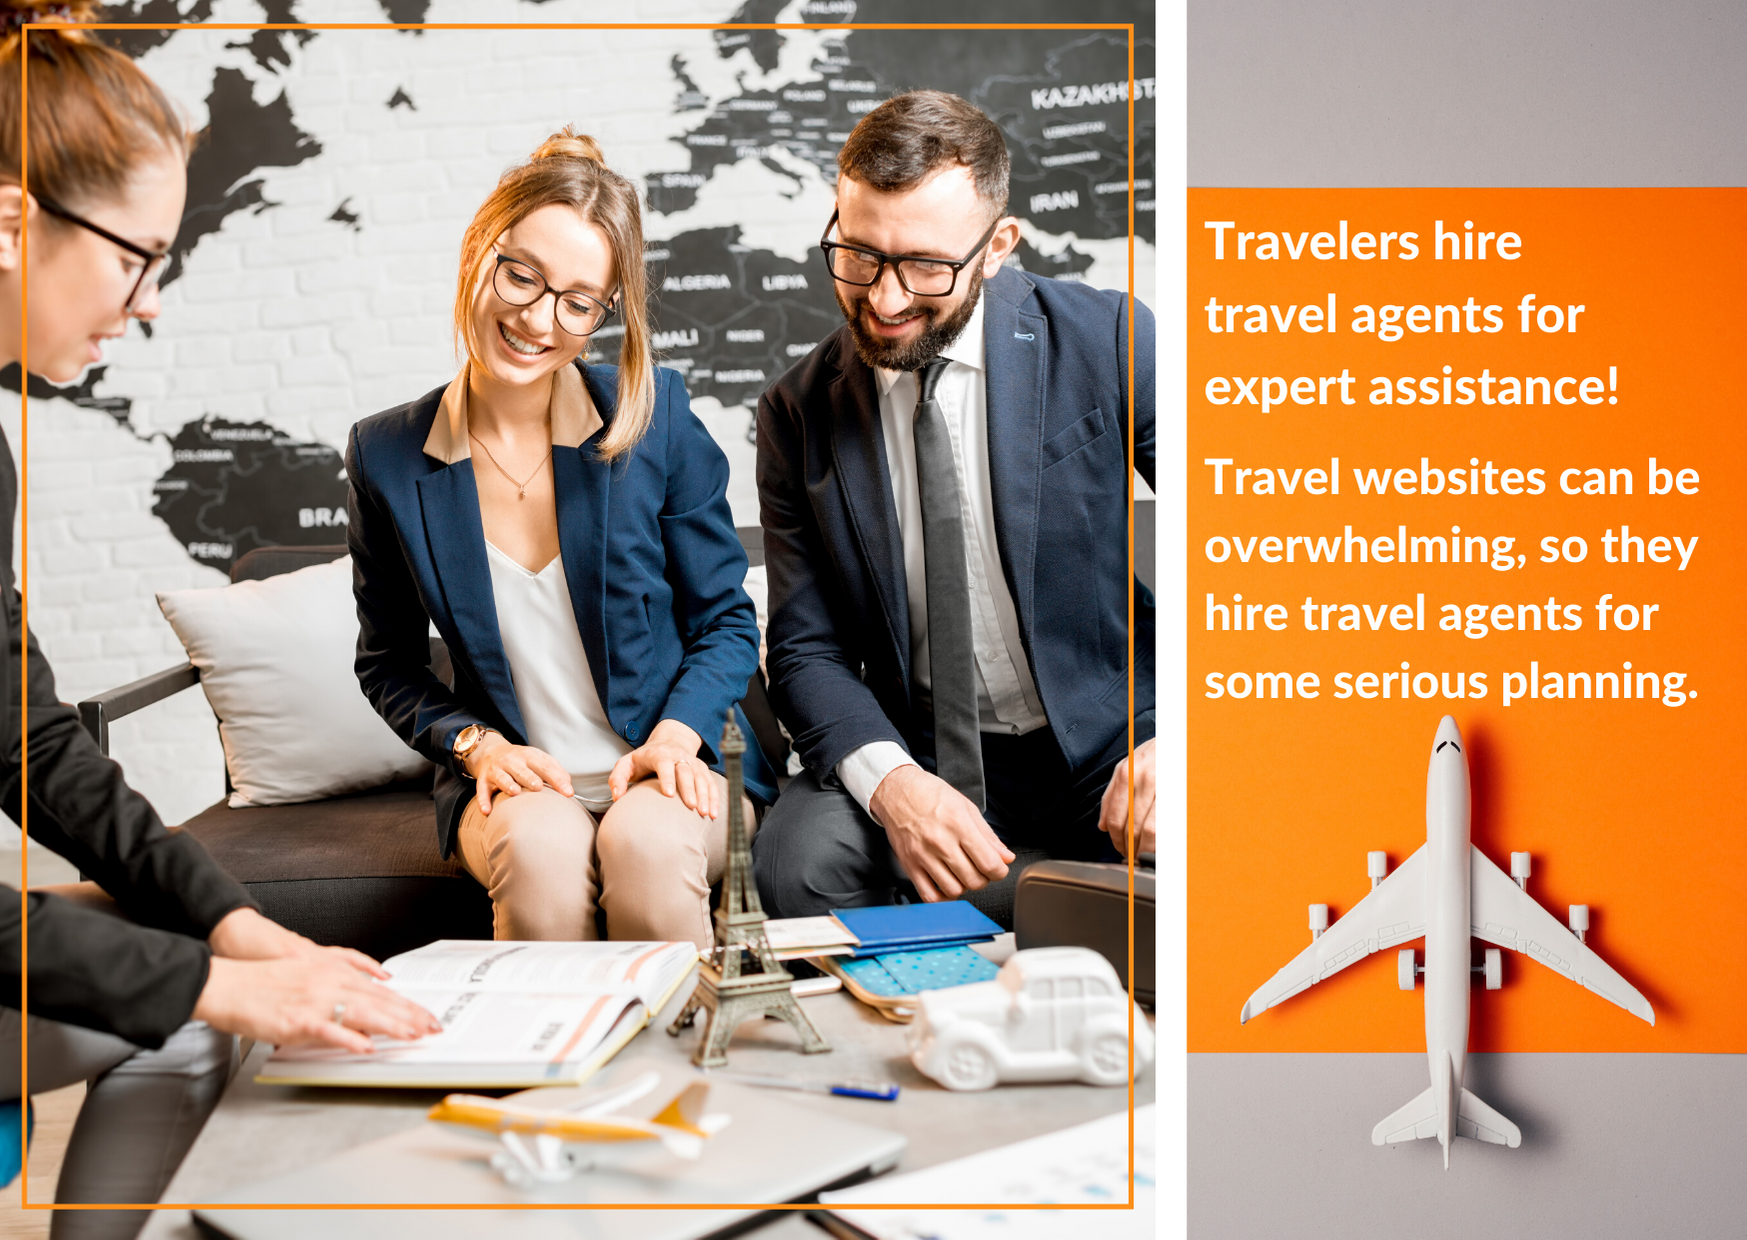 Bachelor's Degrees for becoming a Travel Agent